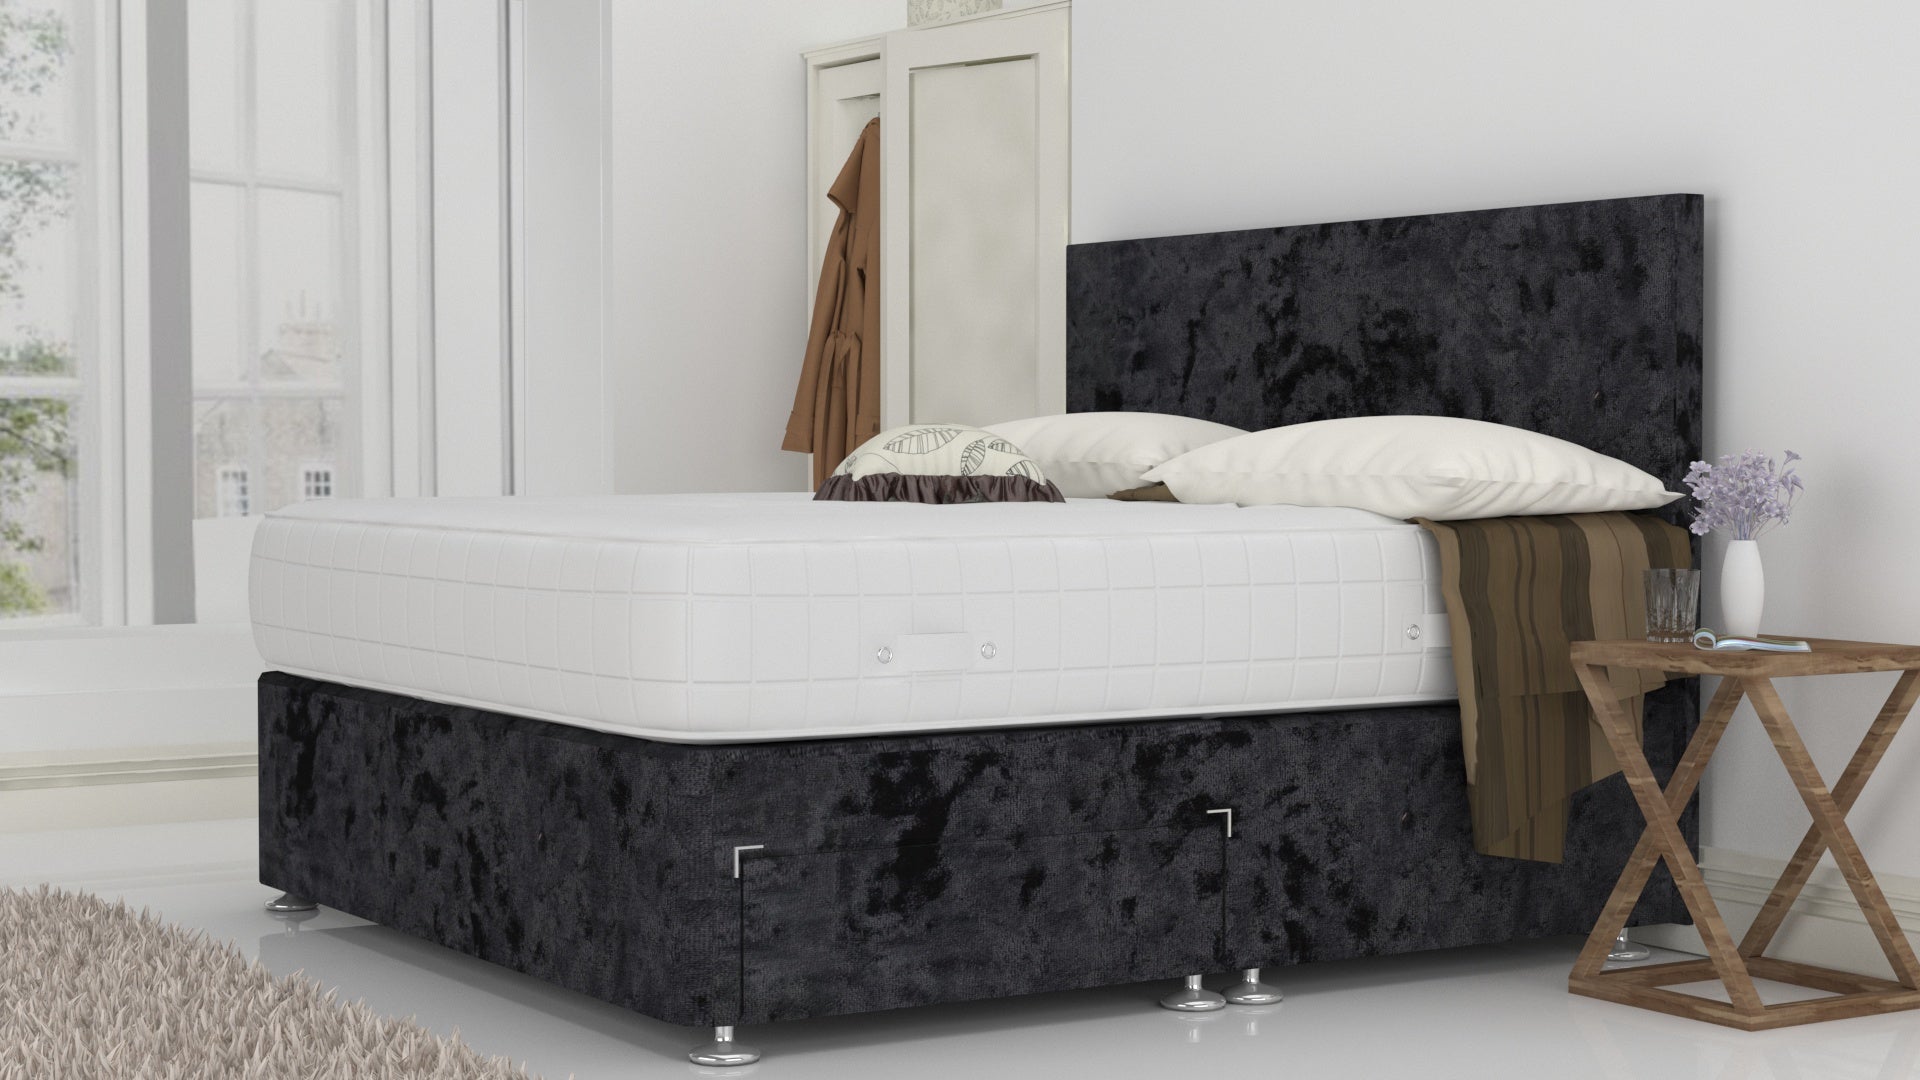 Black Crushed 5 Feet Divan Bed Set With Plain Headboard (Included Feet) And Free Memory Foam Mattress